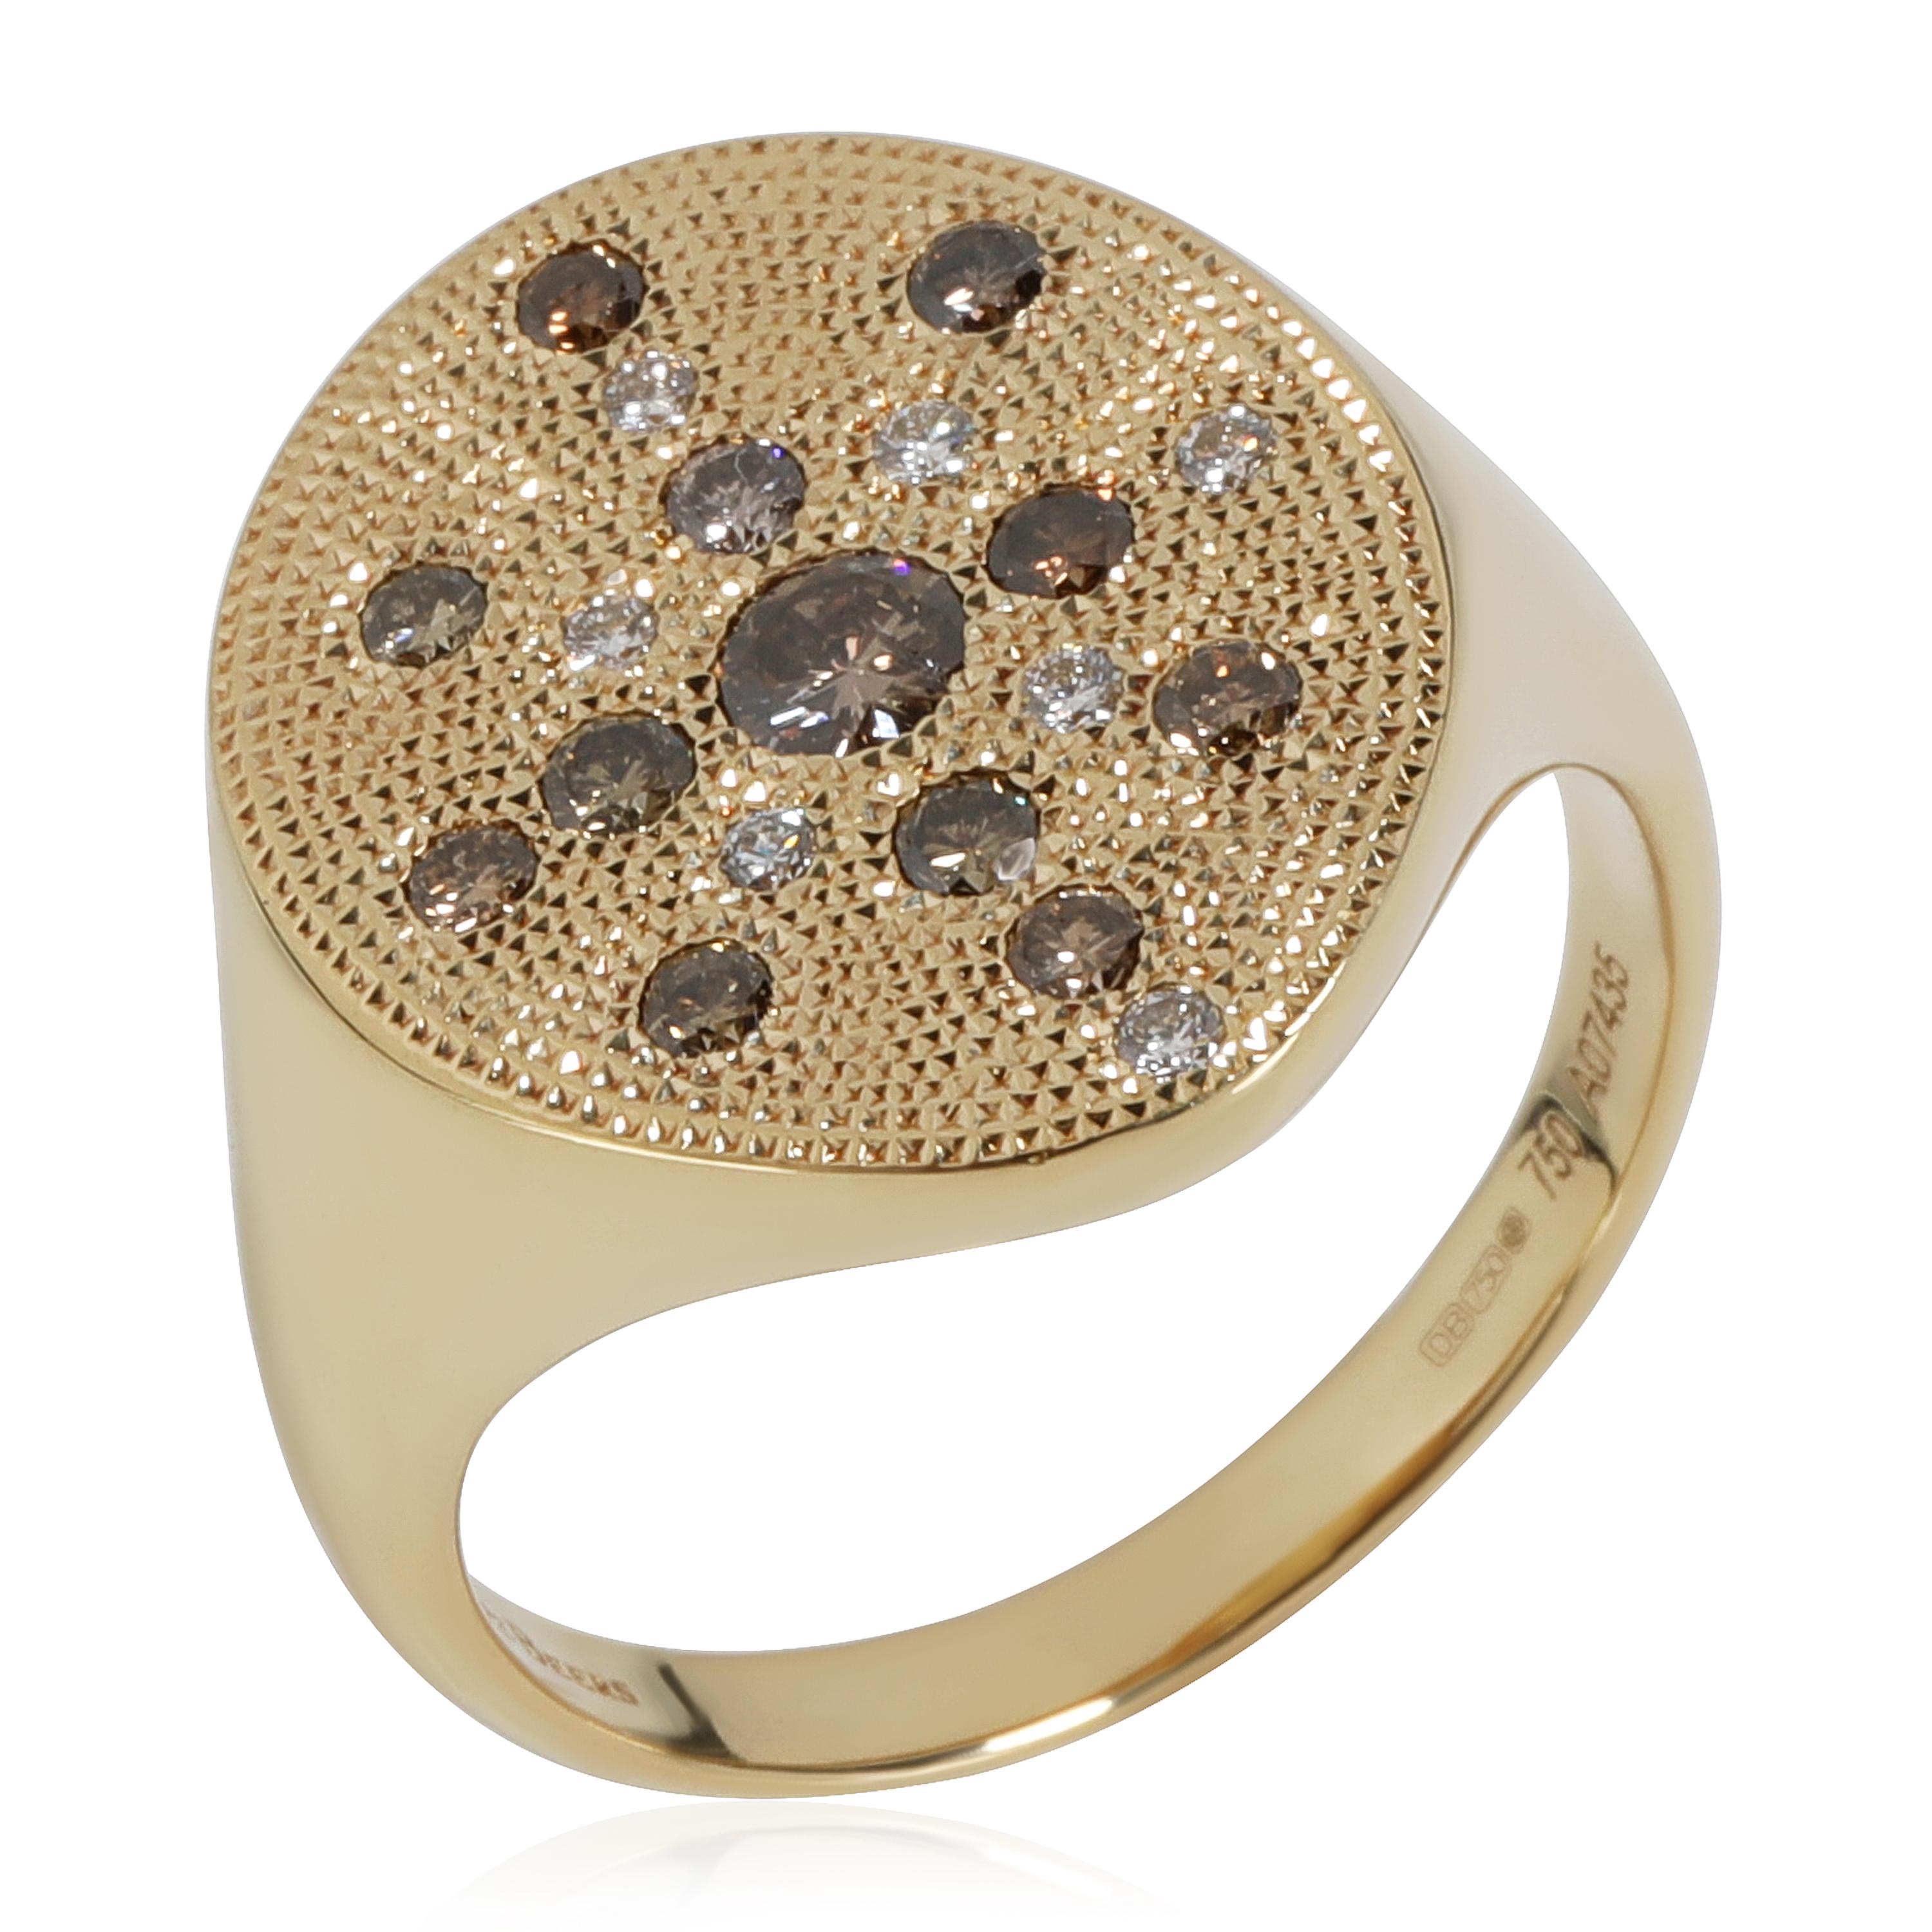 DeBeers Talisman Diamond Signet Style Ring in 18k Yellow Gold 0.52 CTW

PRIMARY DETAILS
SKU: 117162
Listing Title: DeBeers Talisman Diamond Signet Style Ring in 18k Yellow Gold 0.52 CTW
Condition Description: Retails for 3995 USD. In excellent